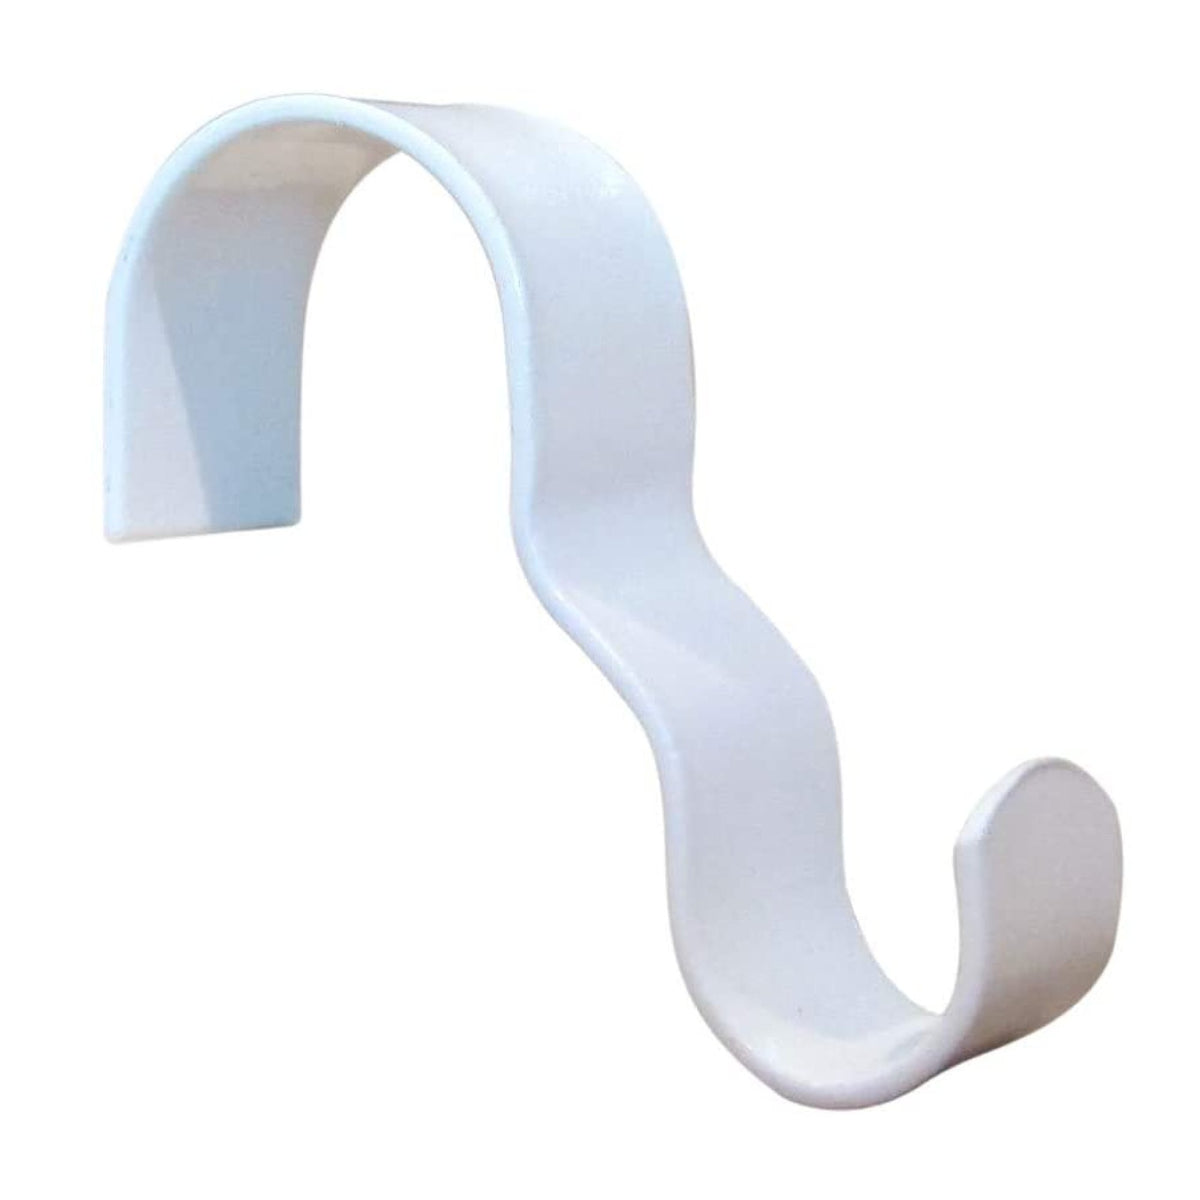 White Picture Rail Hook - HWR-2420X - Picture Hang Solutions